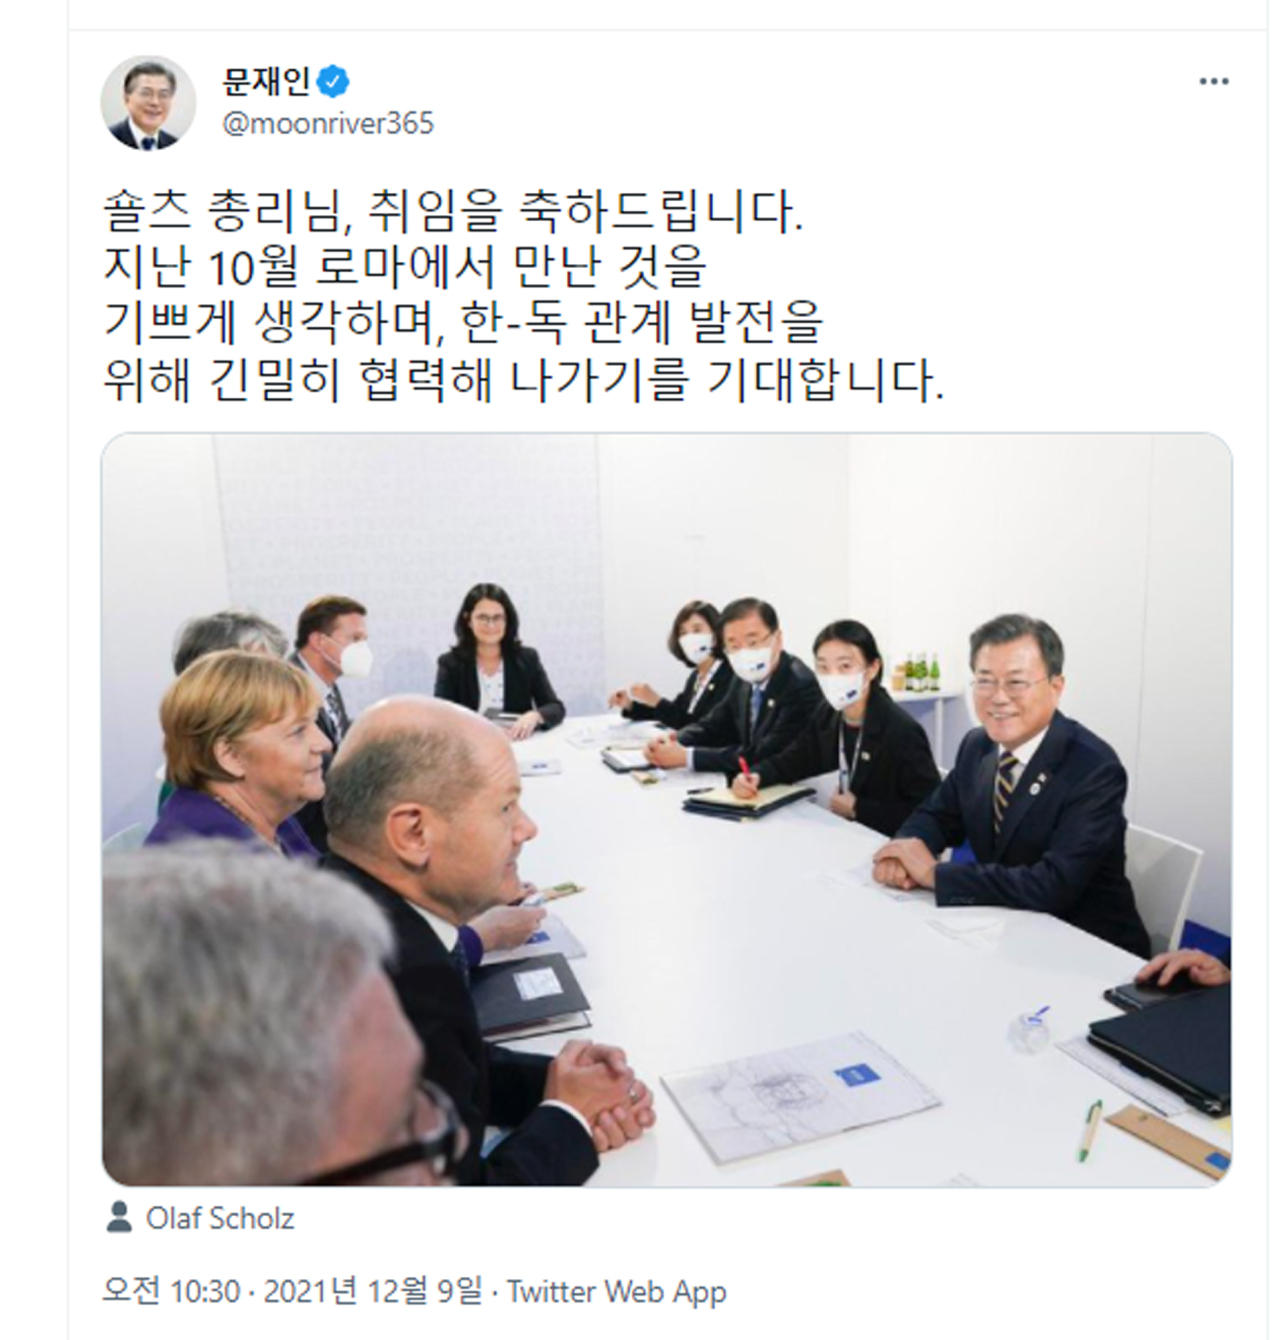 This photo, provided by the presidential office in Seoul on Thursday, shows a Twitter post by South Korean President Moon Jae-in (R) congratulating Olaf Scholz (2nd from L) on his inauguration as new German chancellor and a photo of their meeting in Rome in October. (presidential office)